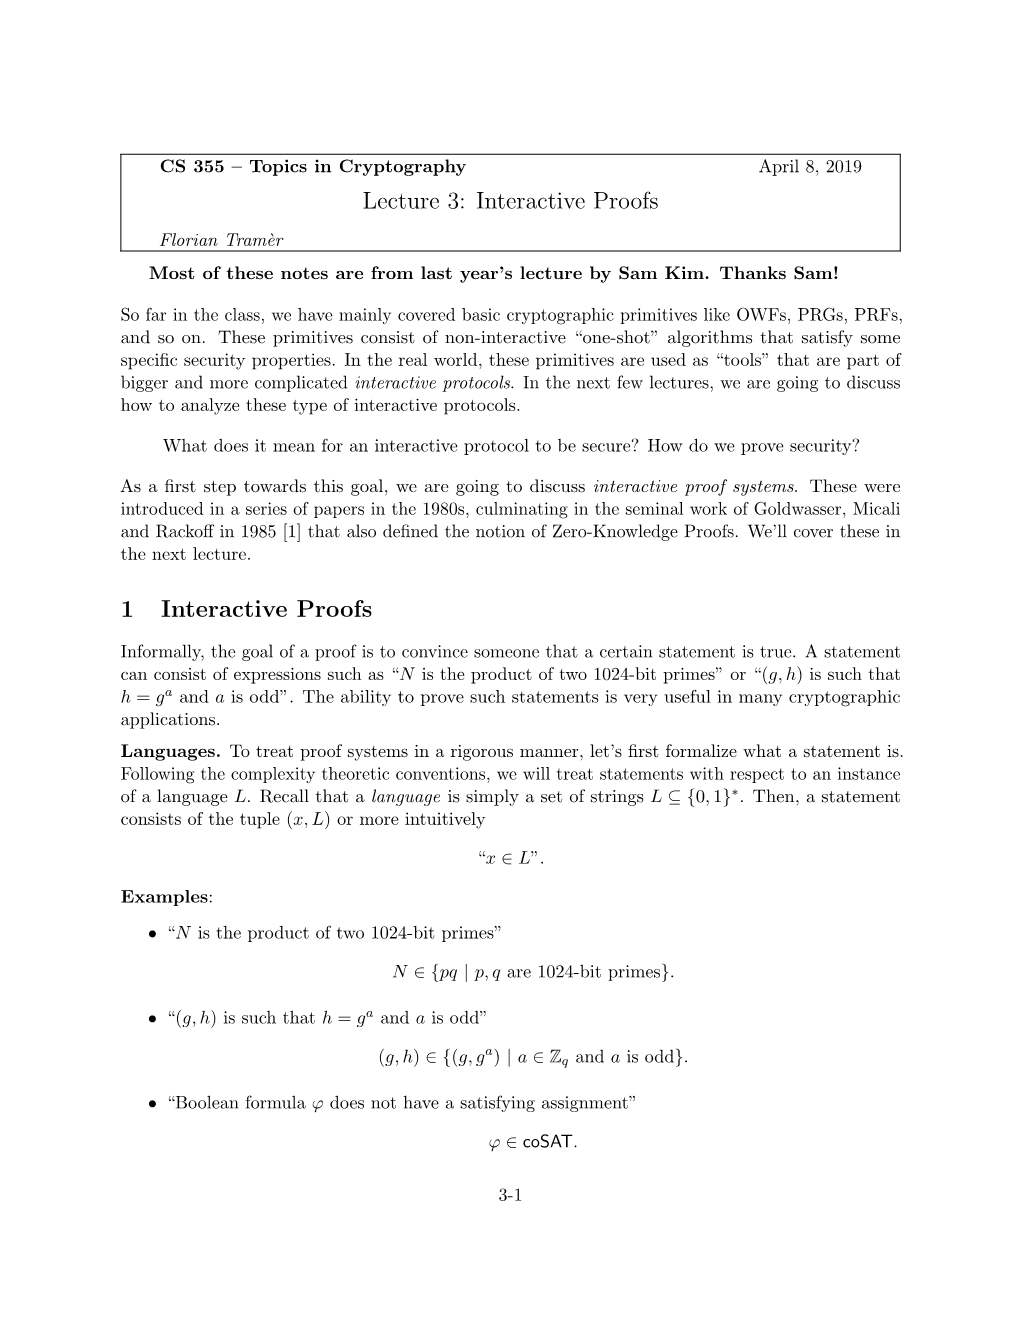 Lecture 3: Interactive Proofs 1 Interactive Proofs